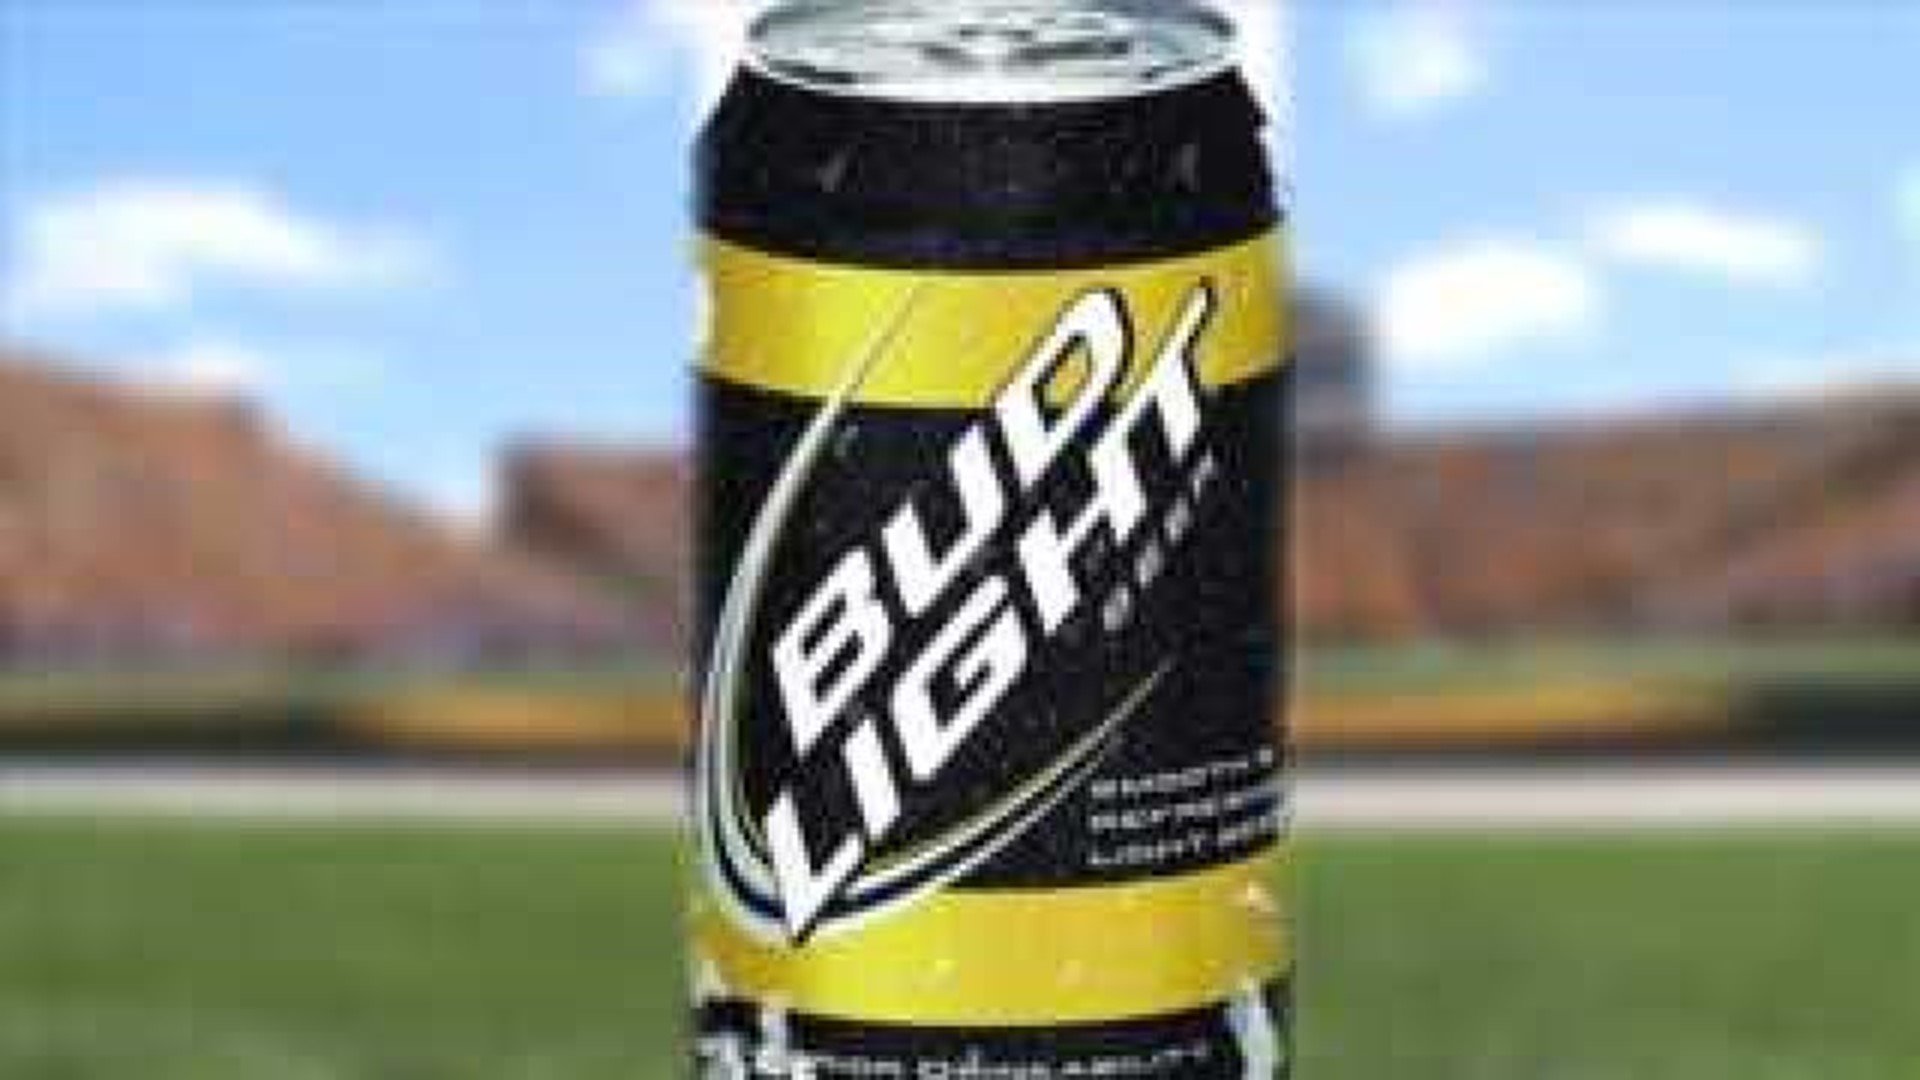 University of Iowa seeks students input on Anheuser-Busch controversy